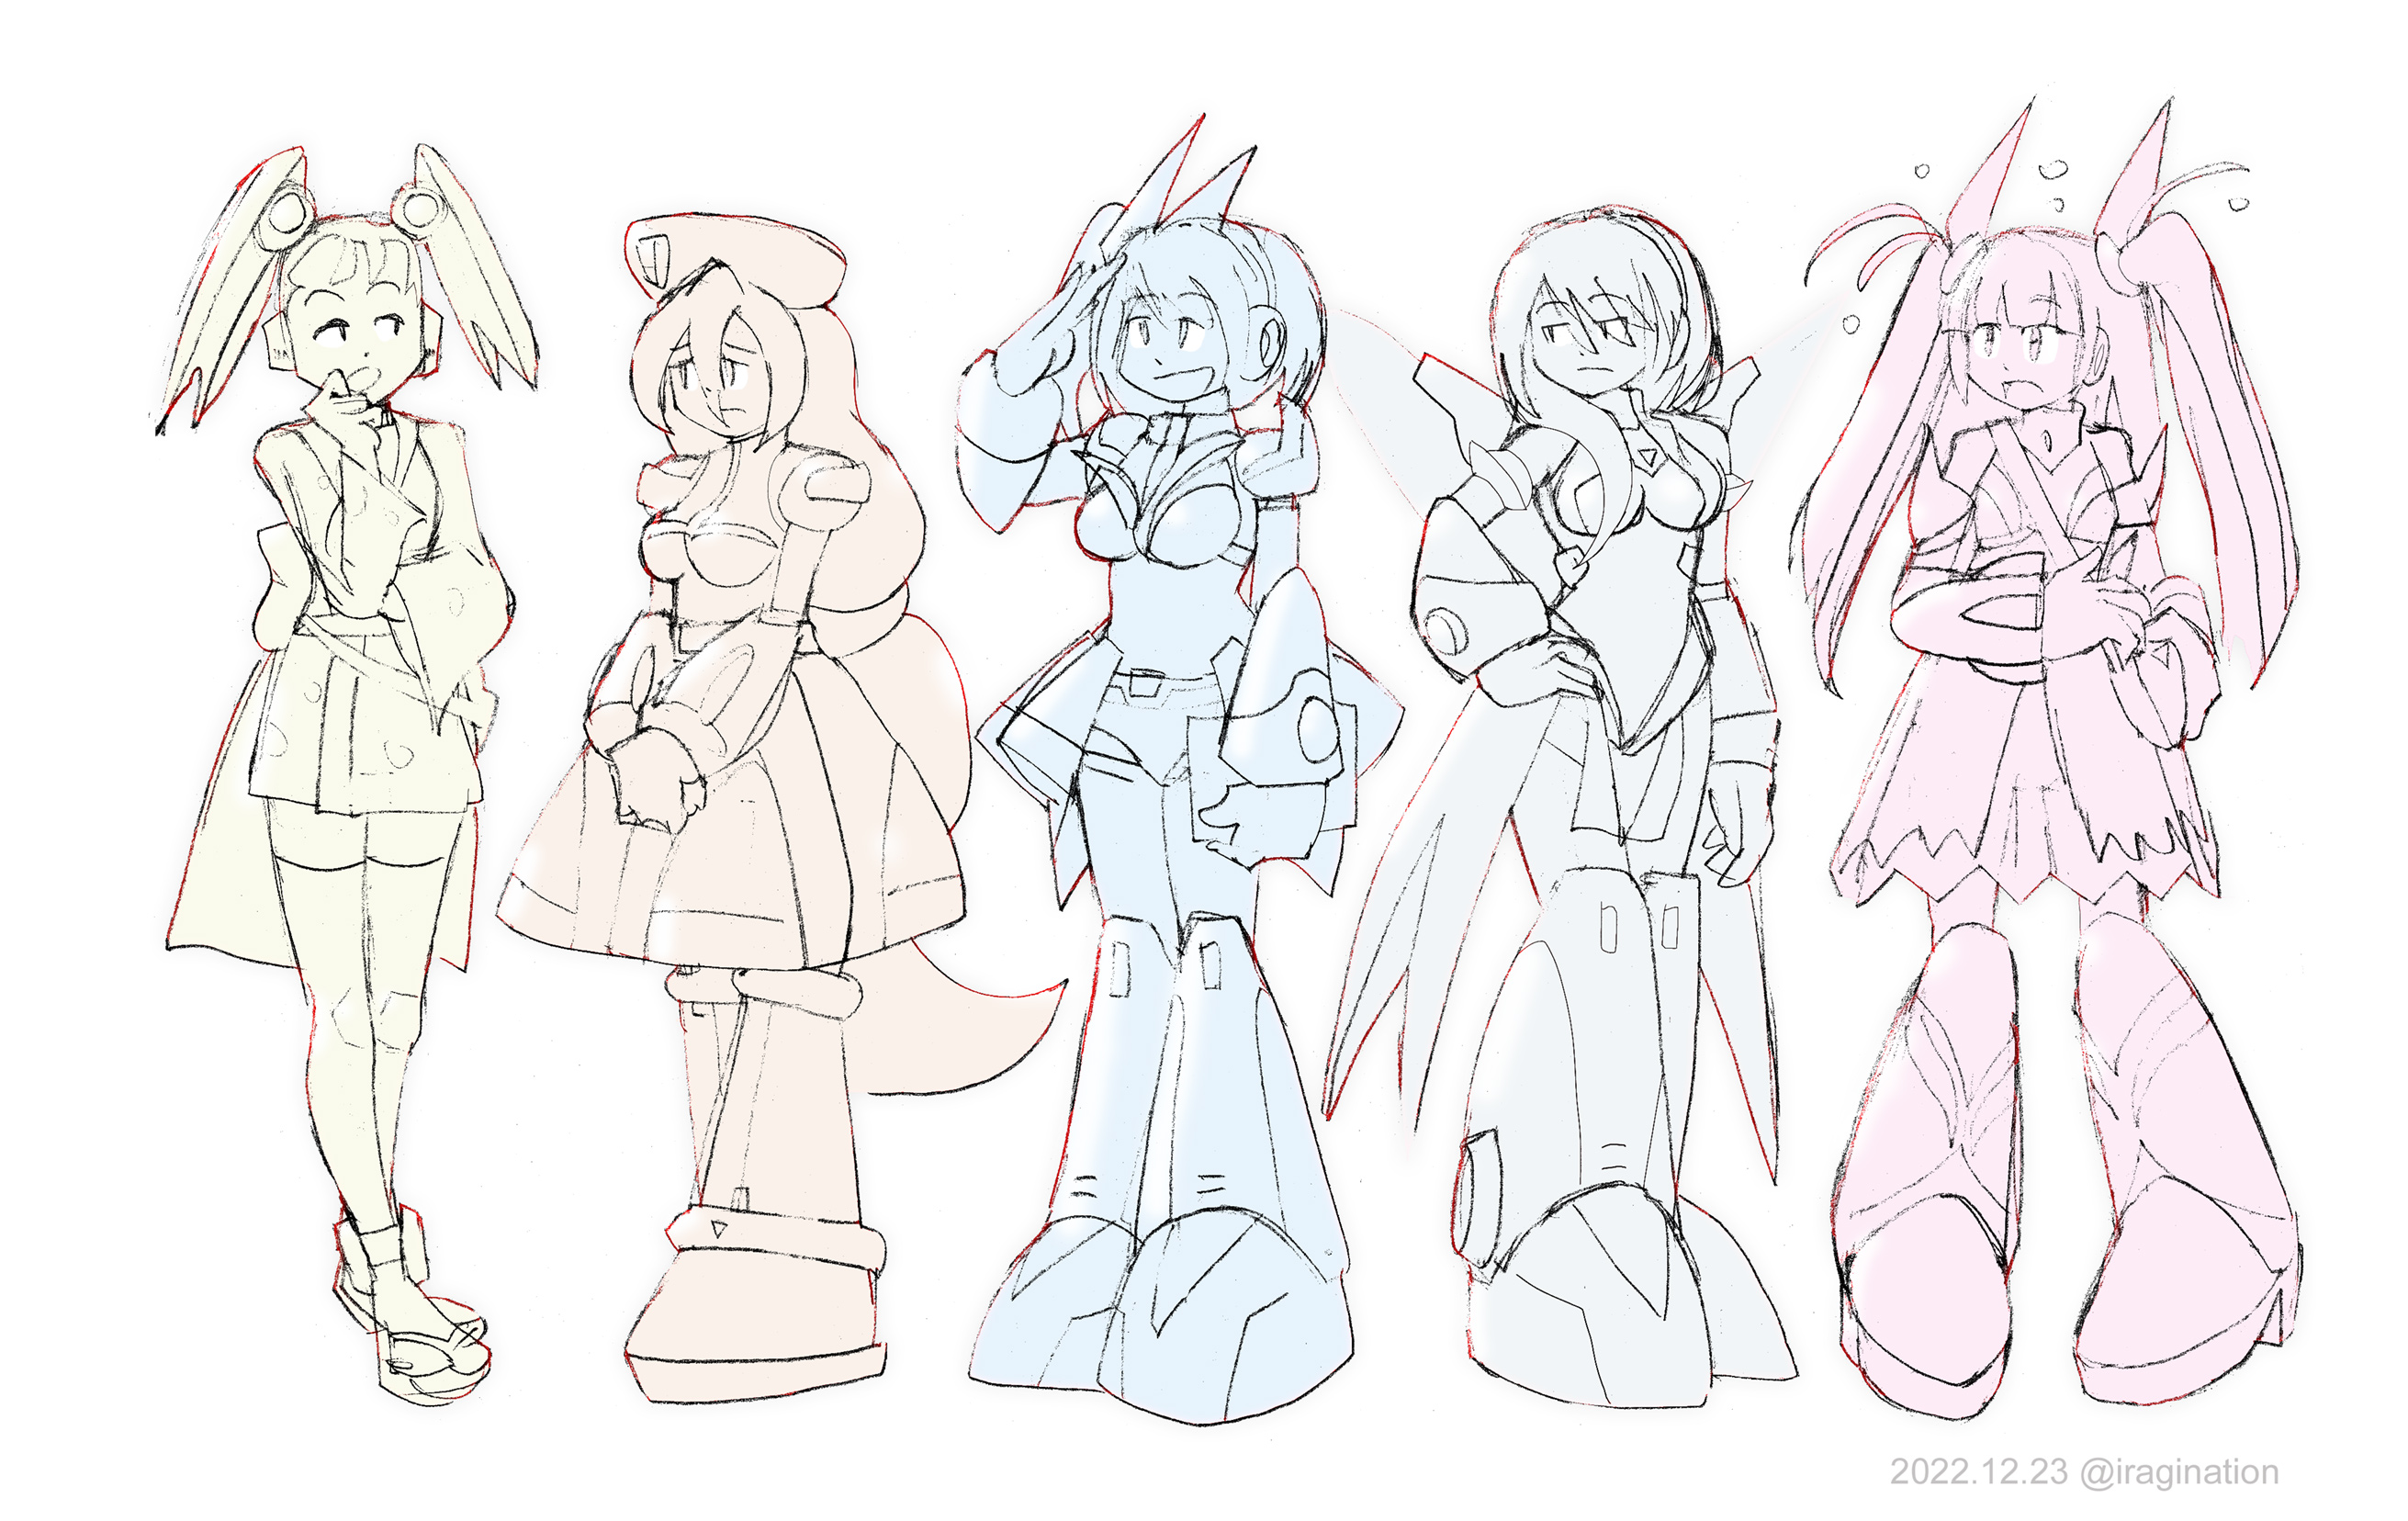 Mega Man X DiVE Girls Sketches
From left to right:

- Yukata Pallette
- Iris
- RiCO
- iCO
- Droitclair

For this quick study, I was looking at the relative size of the Mega Man X DiVE 3D models. Some results were kind of surprising, so not sure what to make of it.

Mega Man X DiVE © CAPCOM
Keywords: pallette iris RiCO iCO droitclair